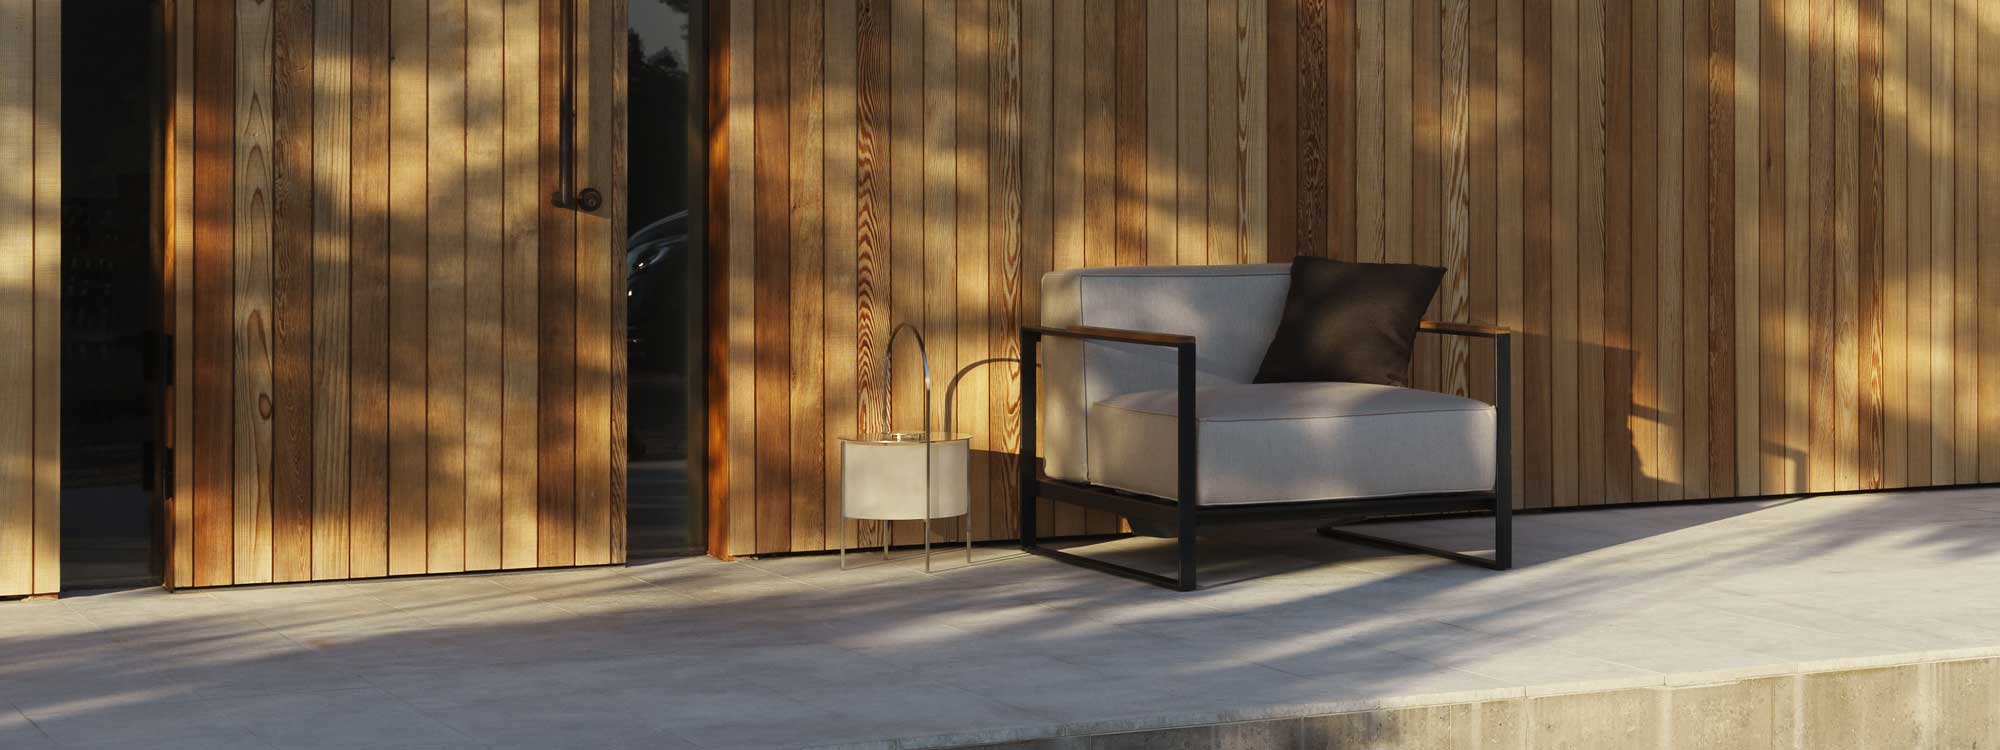 Image of Moore minimalist garden lounge chair in early evening sun, shown on concrete terrace against wooden weatherboarded wall